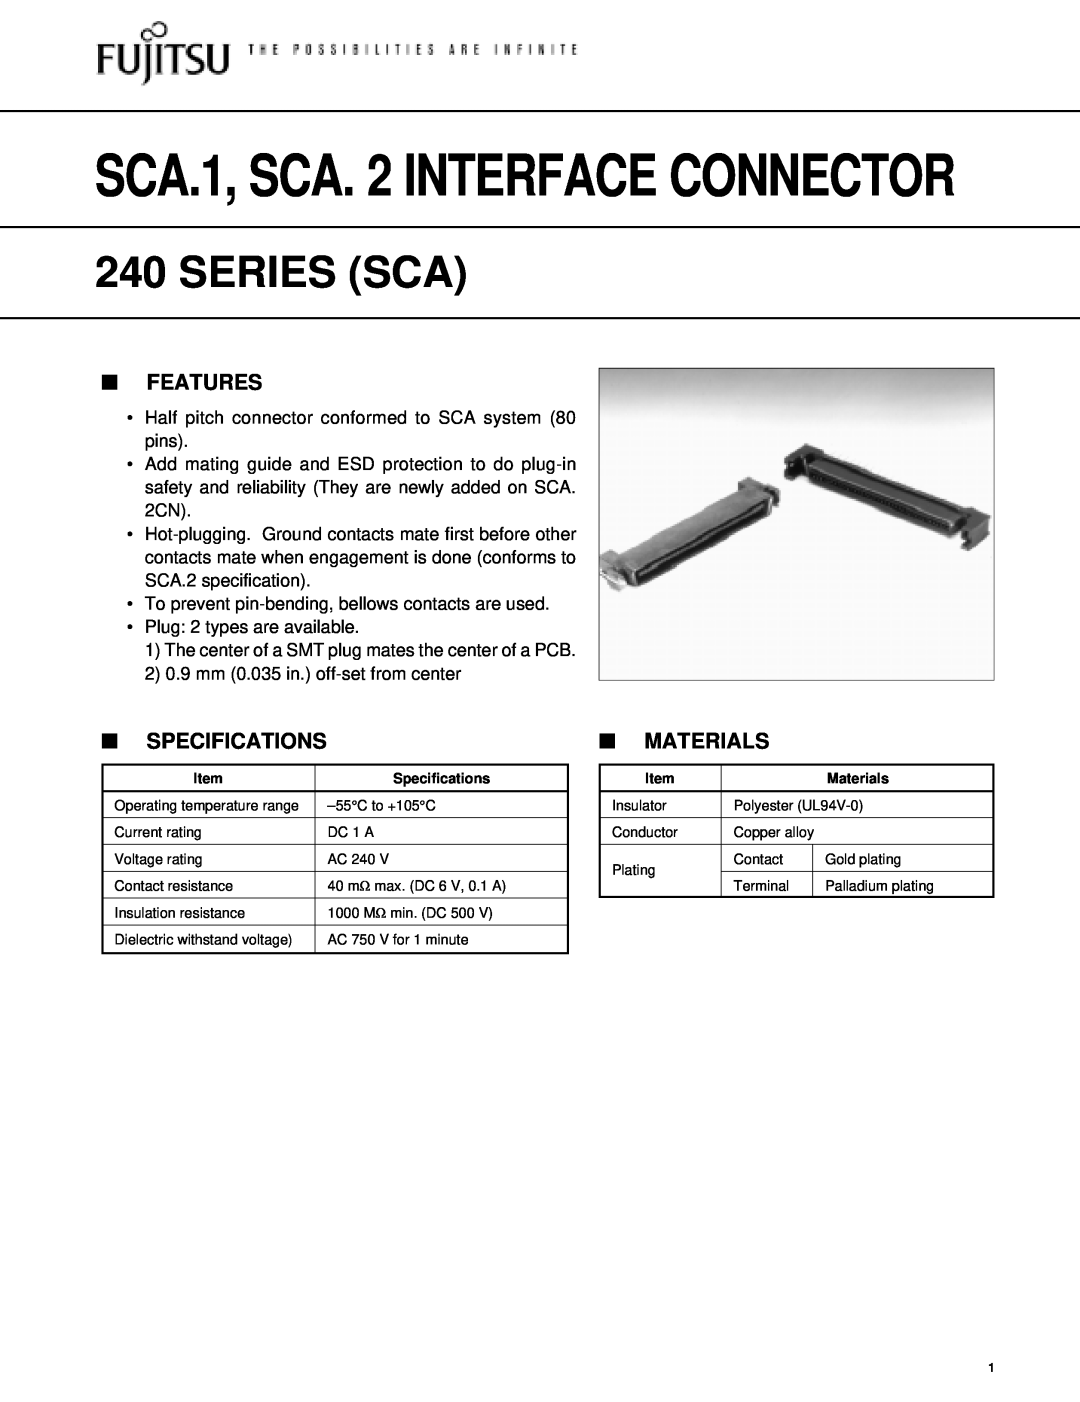 Fujitsu SCA.2 specifications Features, Specifications, Materials, SCA.1, SCA. 2 INTERFACE CONNECTOR, Series Sca 